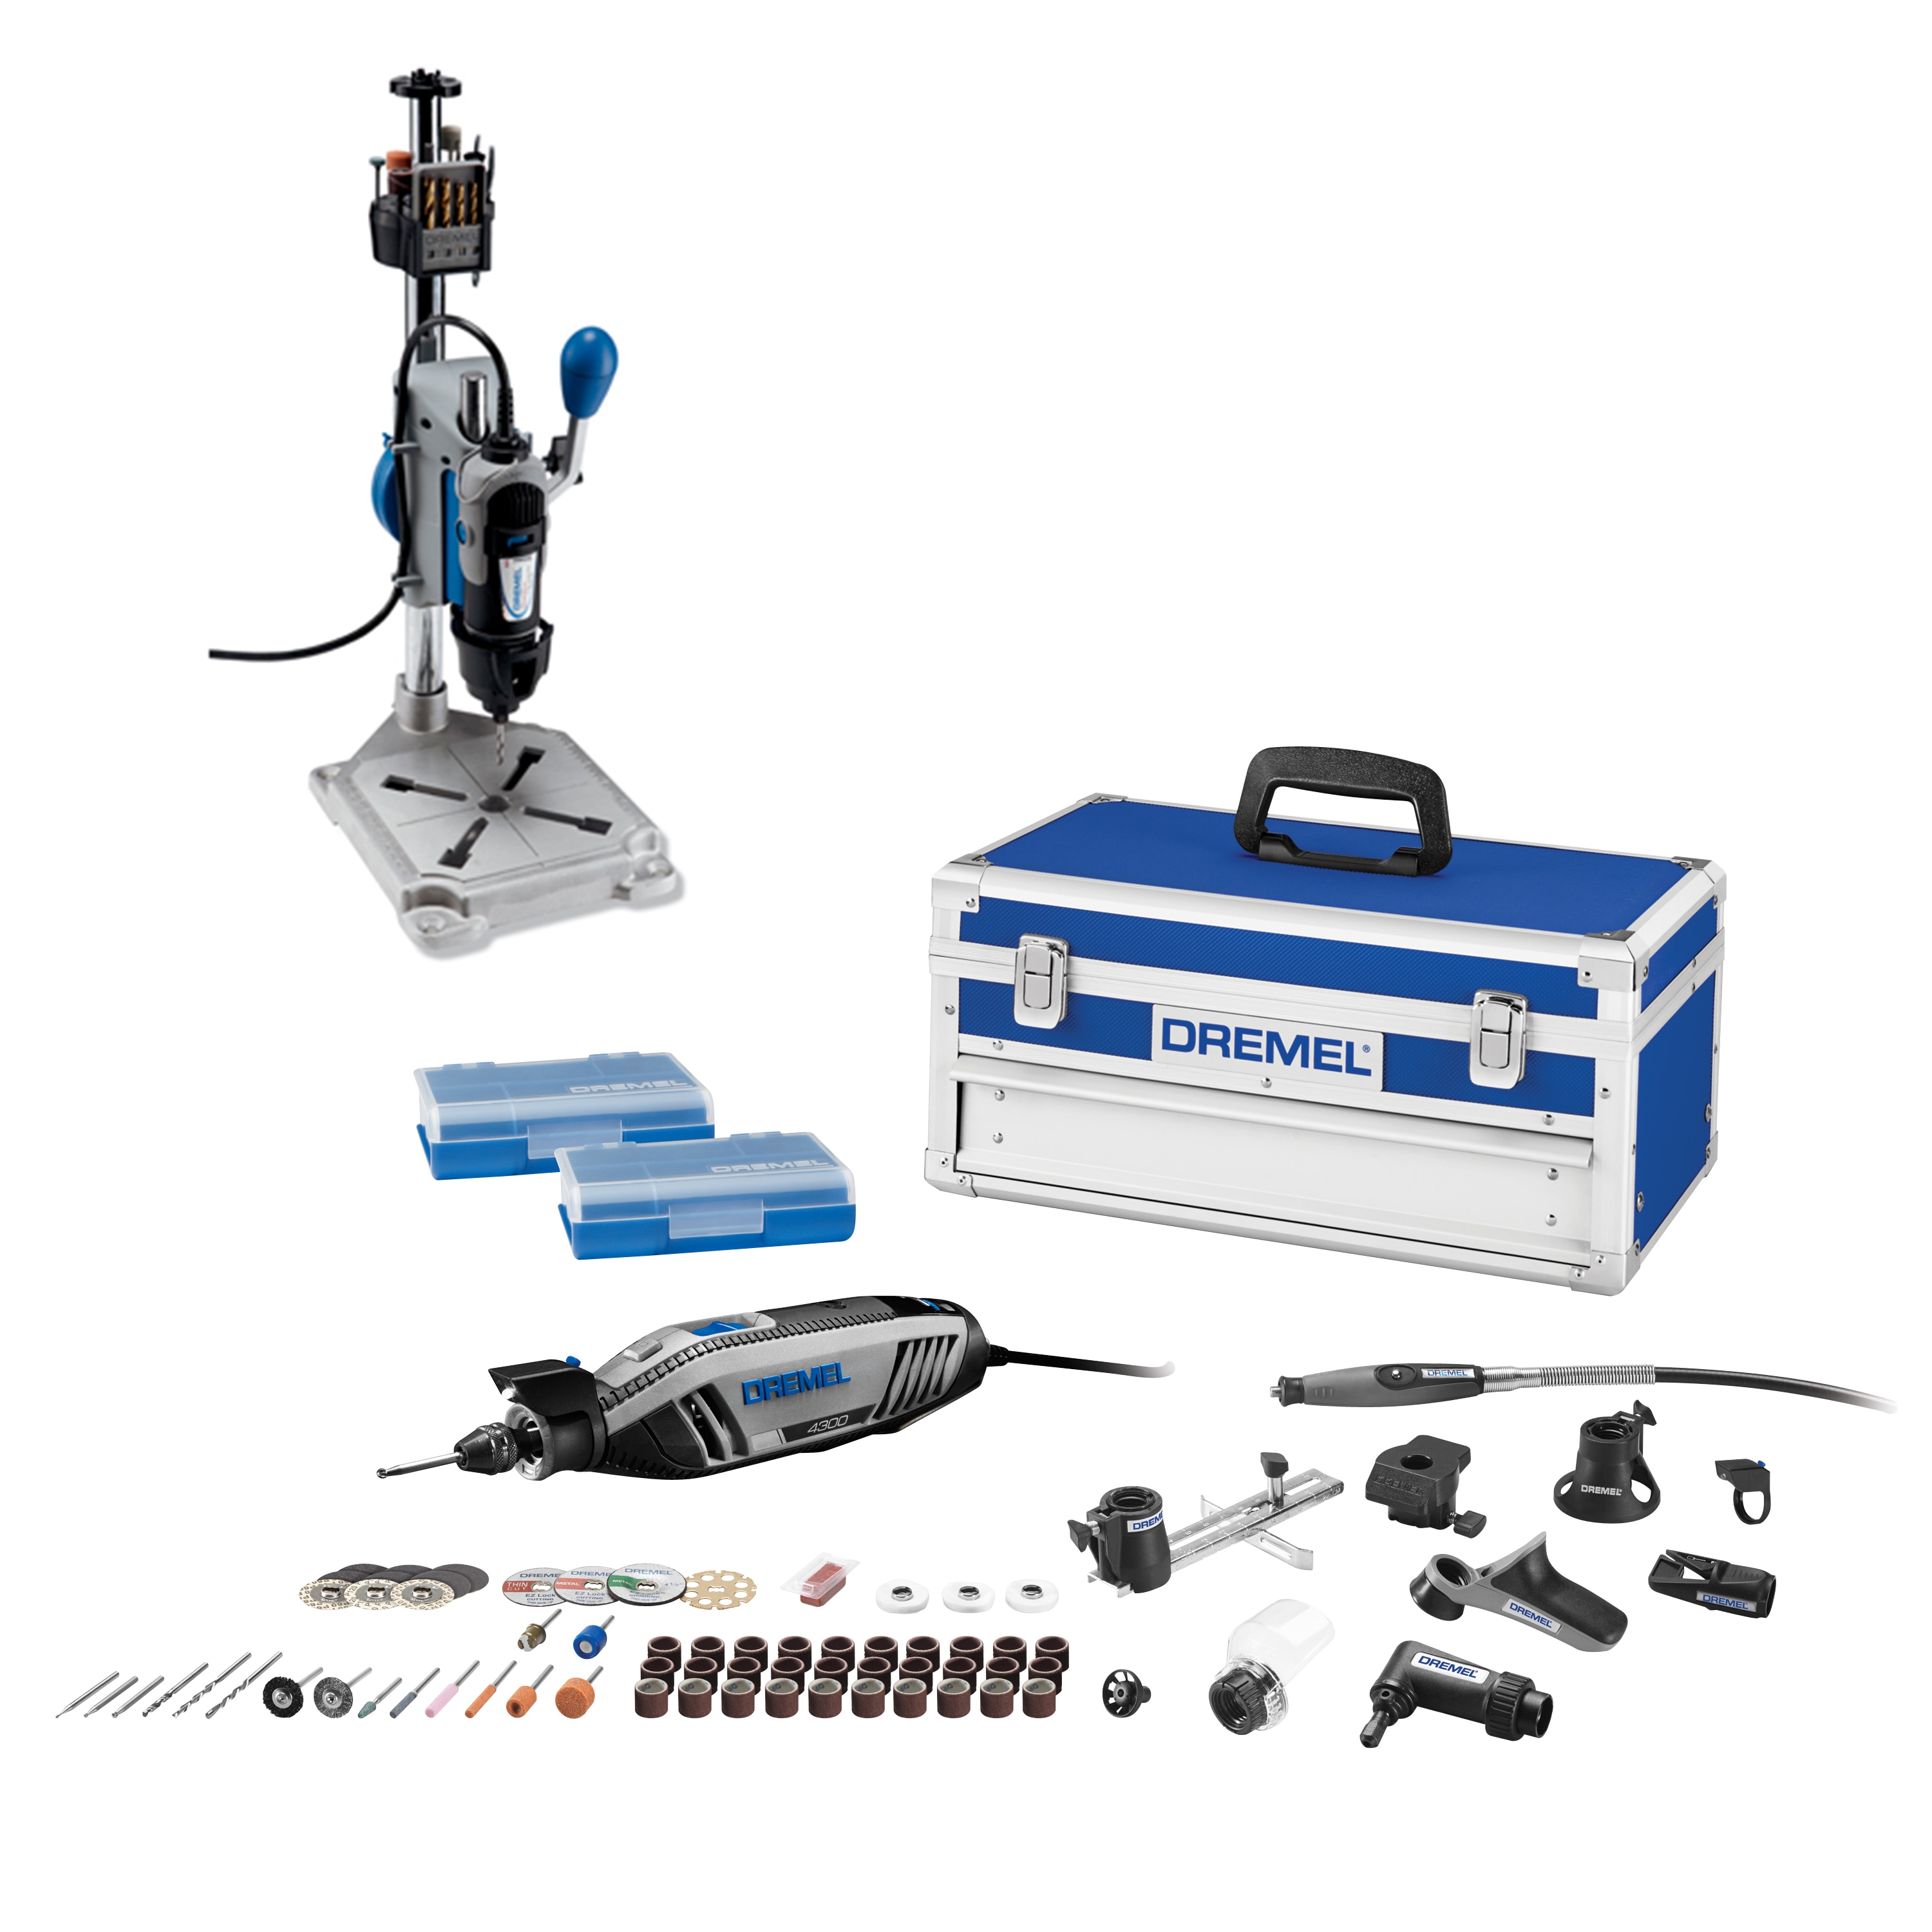 Shop Dremel 4300 Variable Speed Rotary Tool with 9 and 63 Accessories Drill Press Workstation at Lowes.com